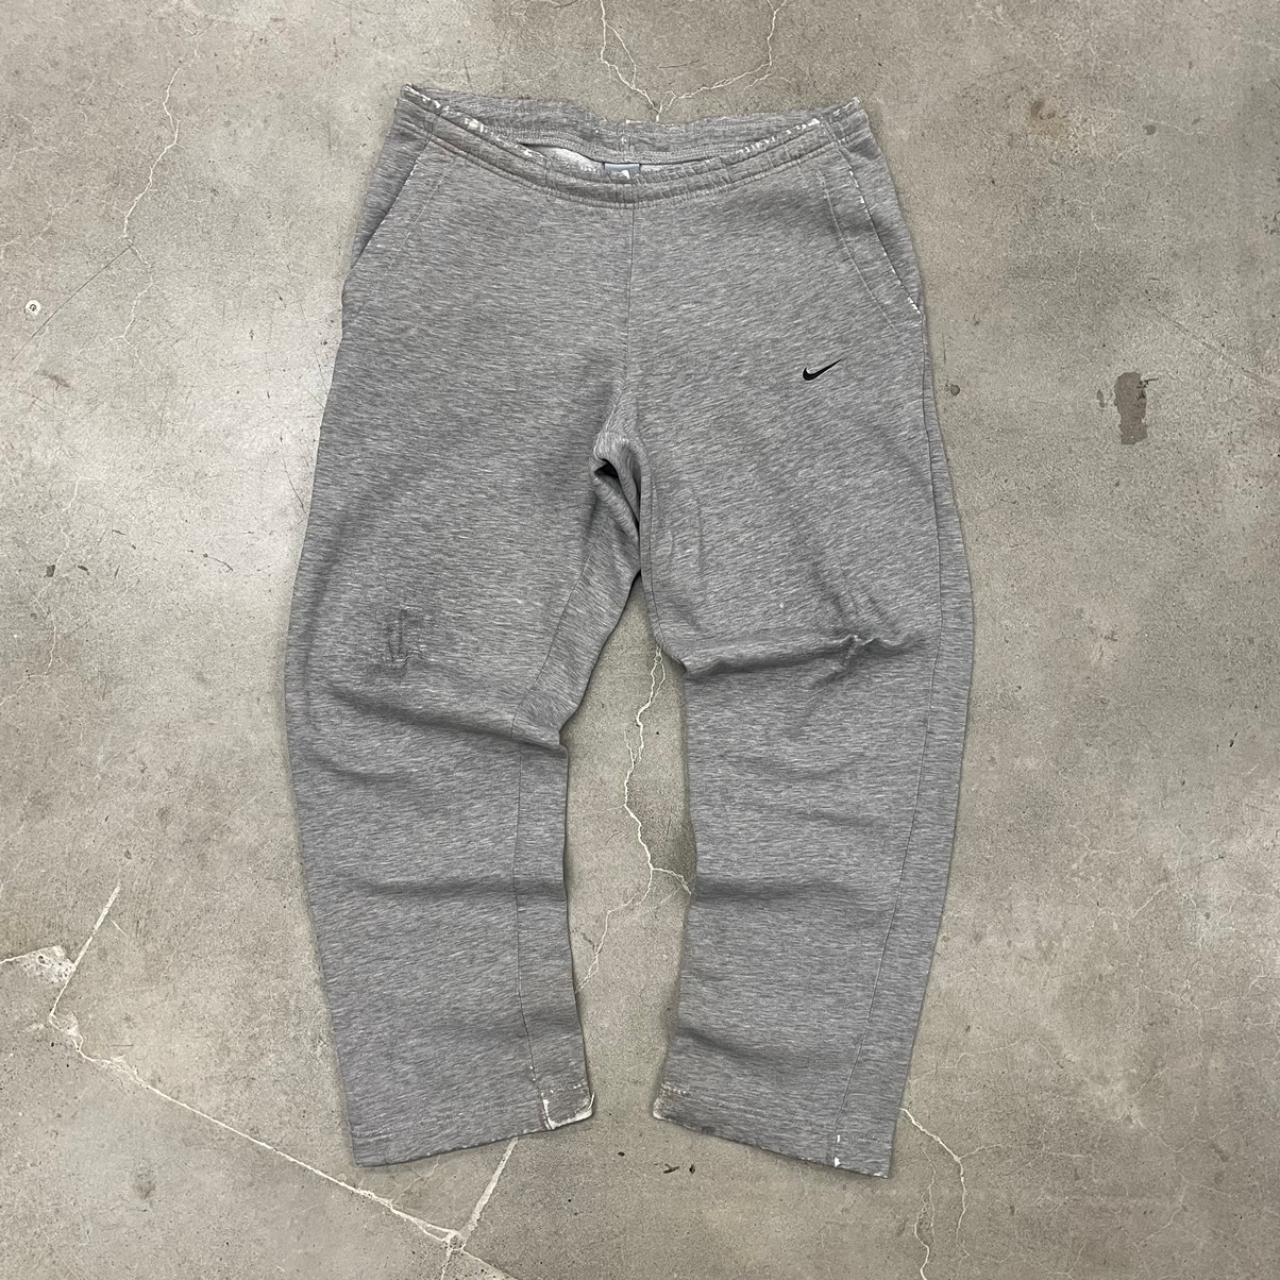 2000s NIKE wide silhouette sweat easy pants . SOLD